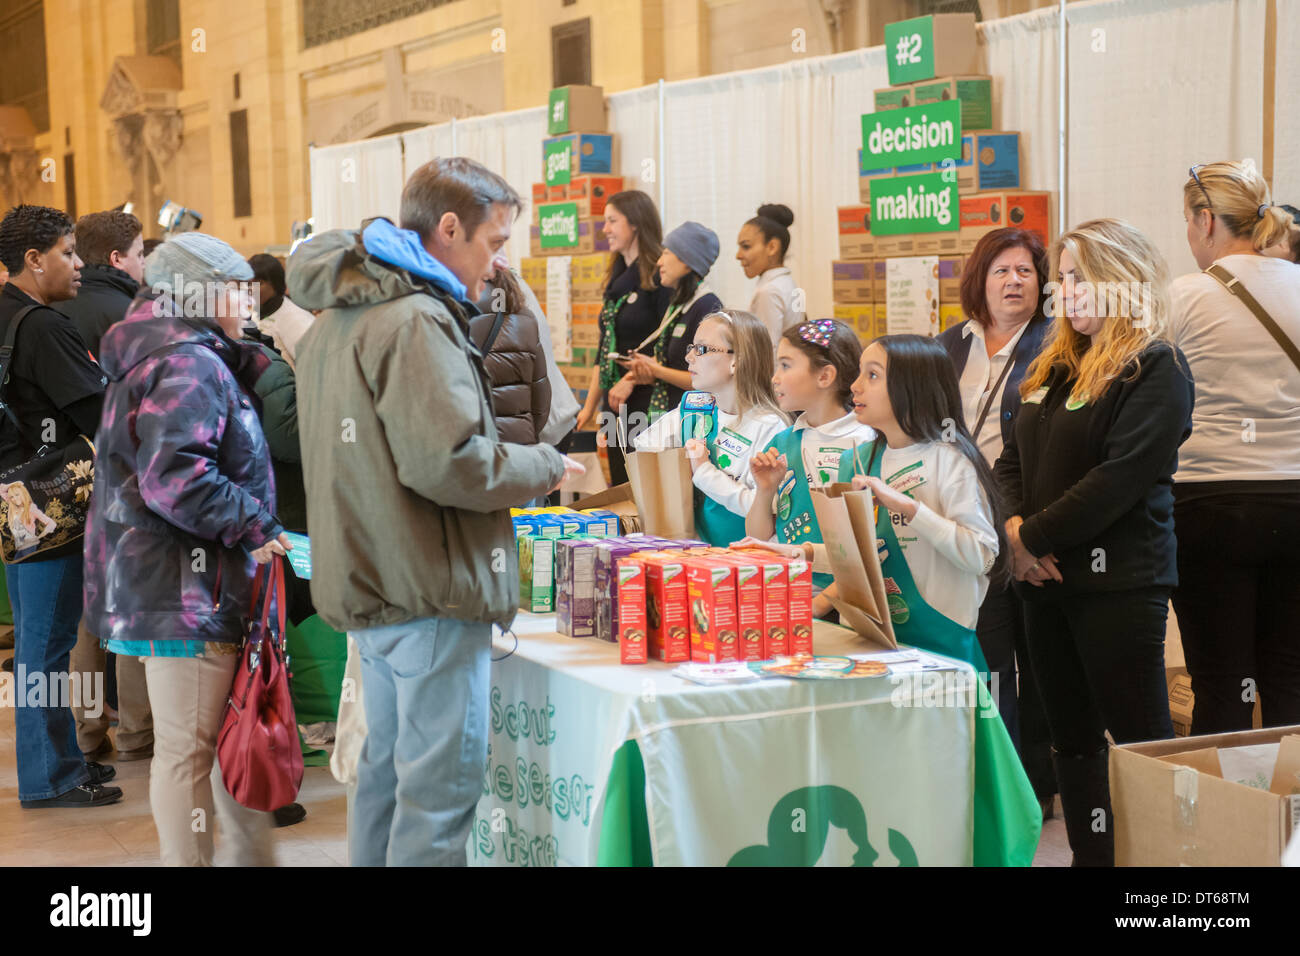 Girl Scouts mark the start of National Girl Scout Cookie Weekend in Vanderbilt Hall in Grand Central Terminal in New York Stock Photo